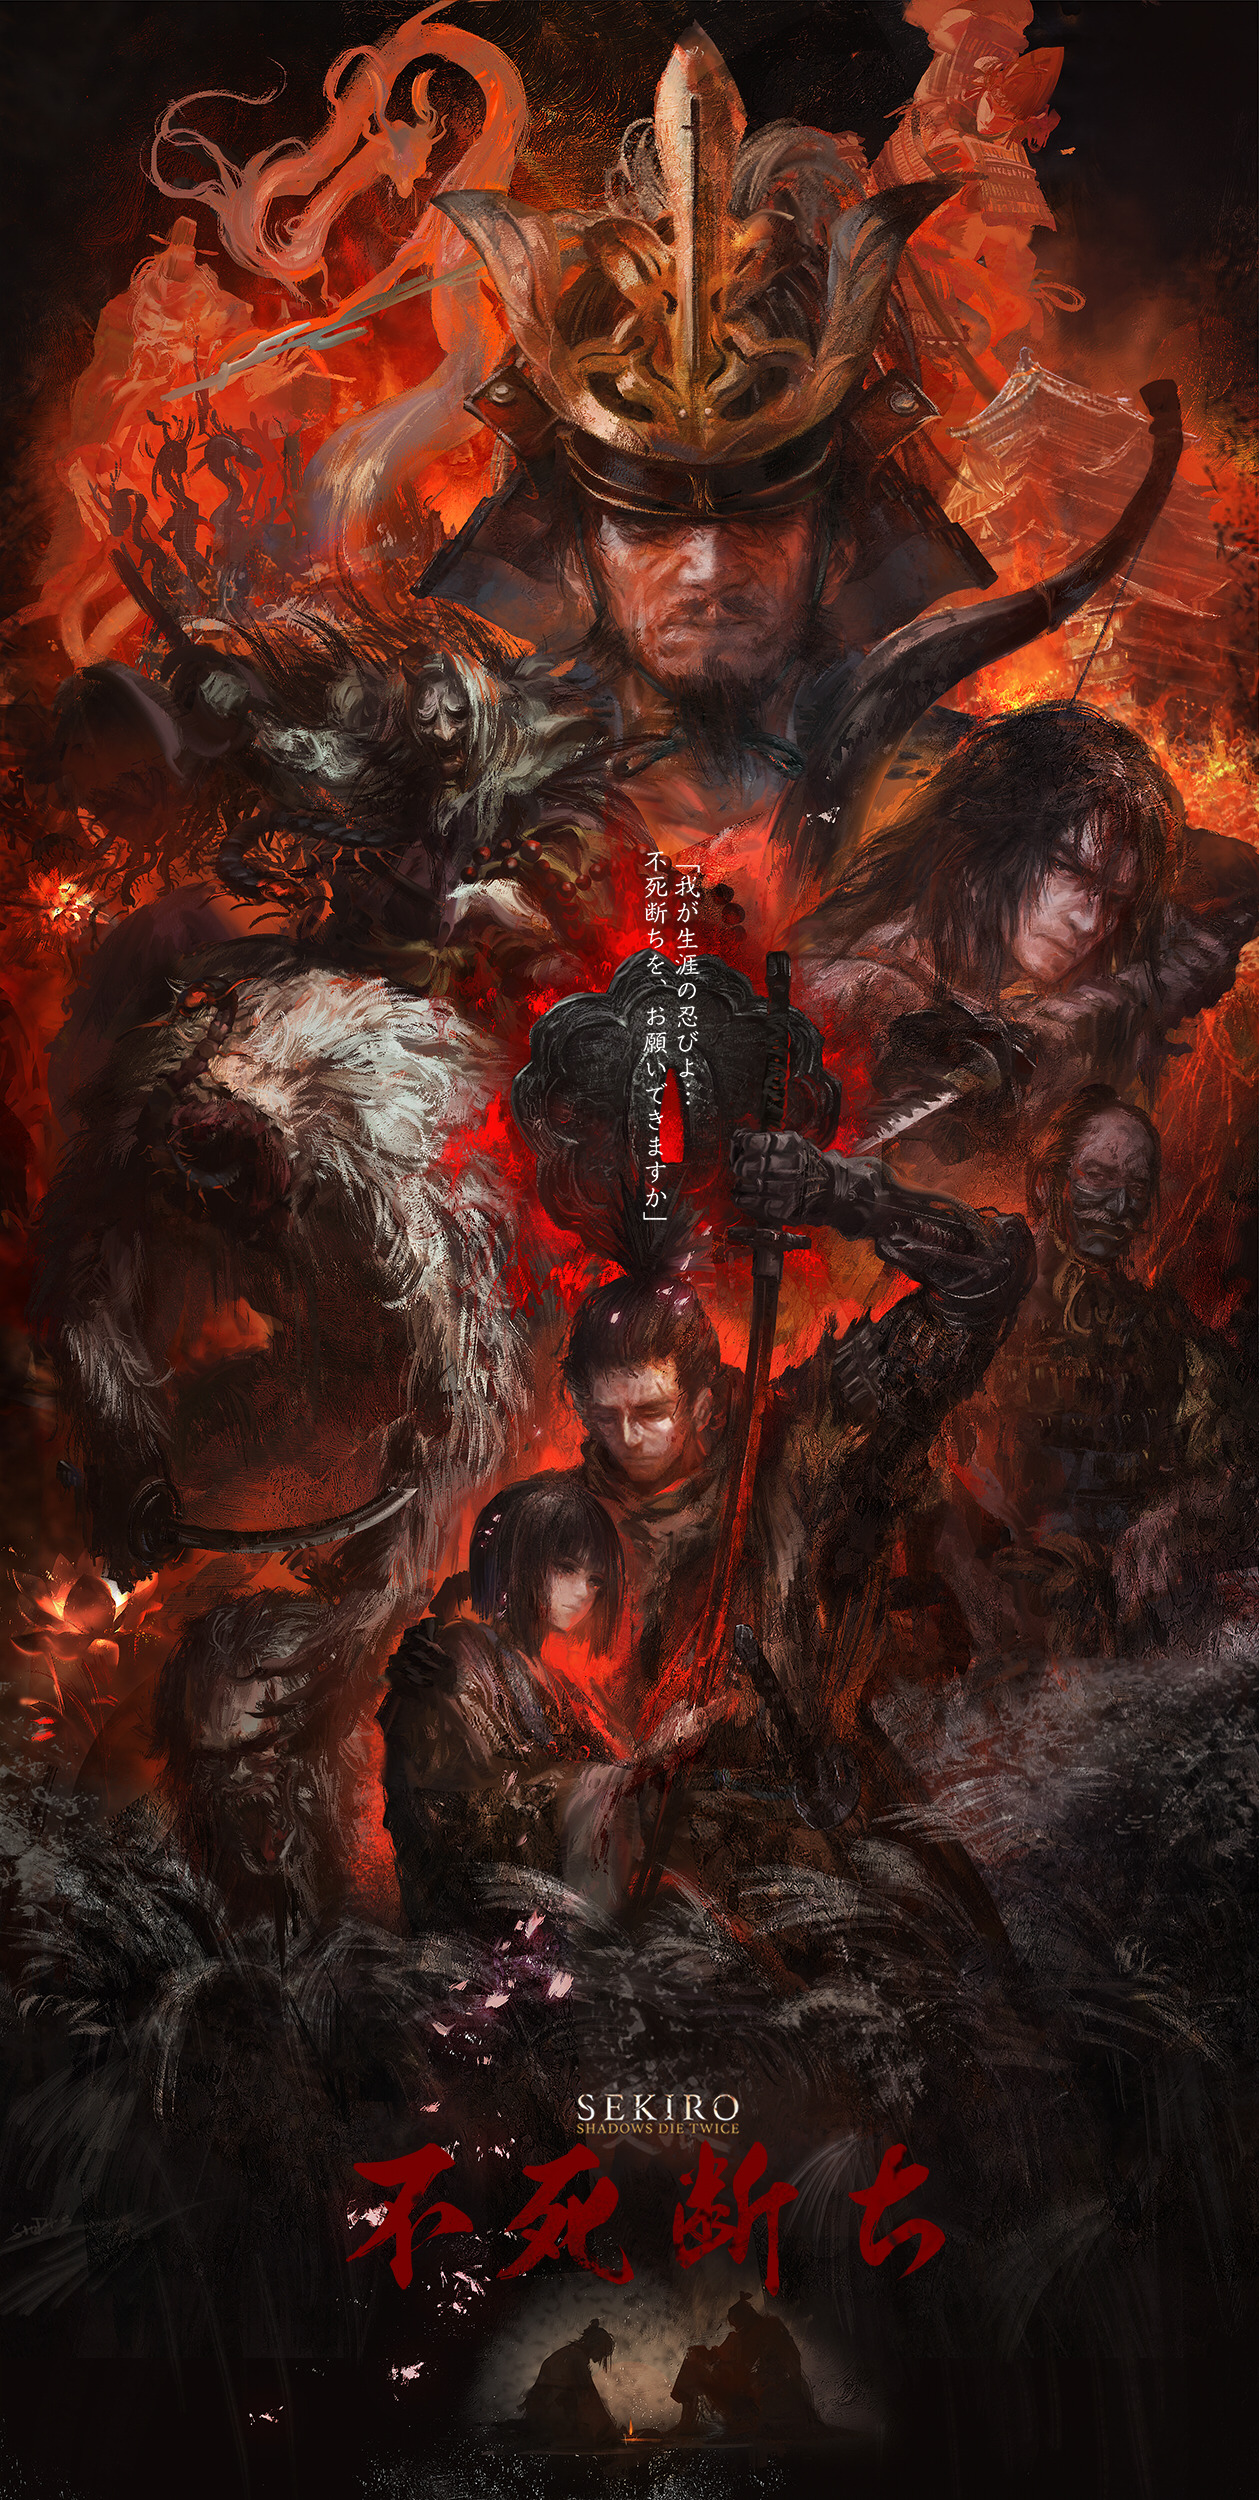 In This House Soulsborne Hours Are 24 7 Sekiro Fanart By Stu Dts